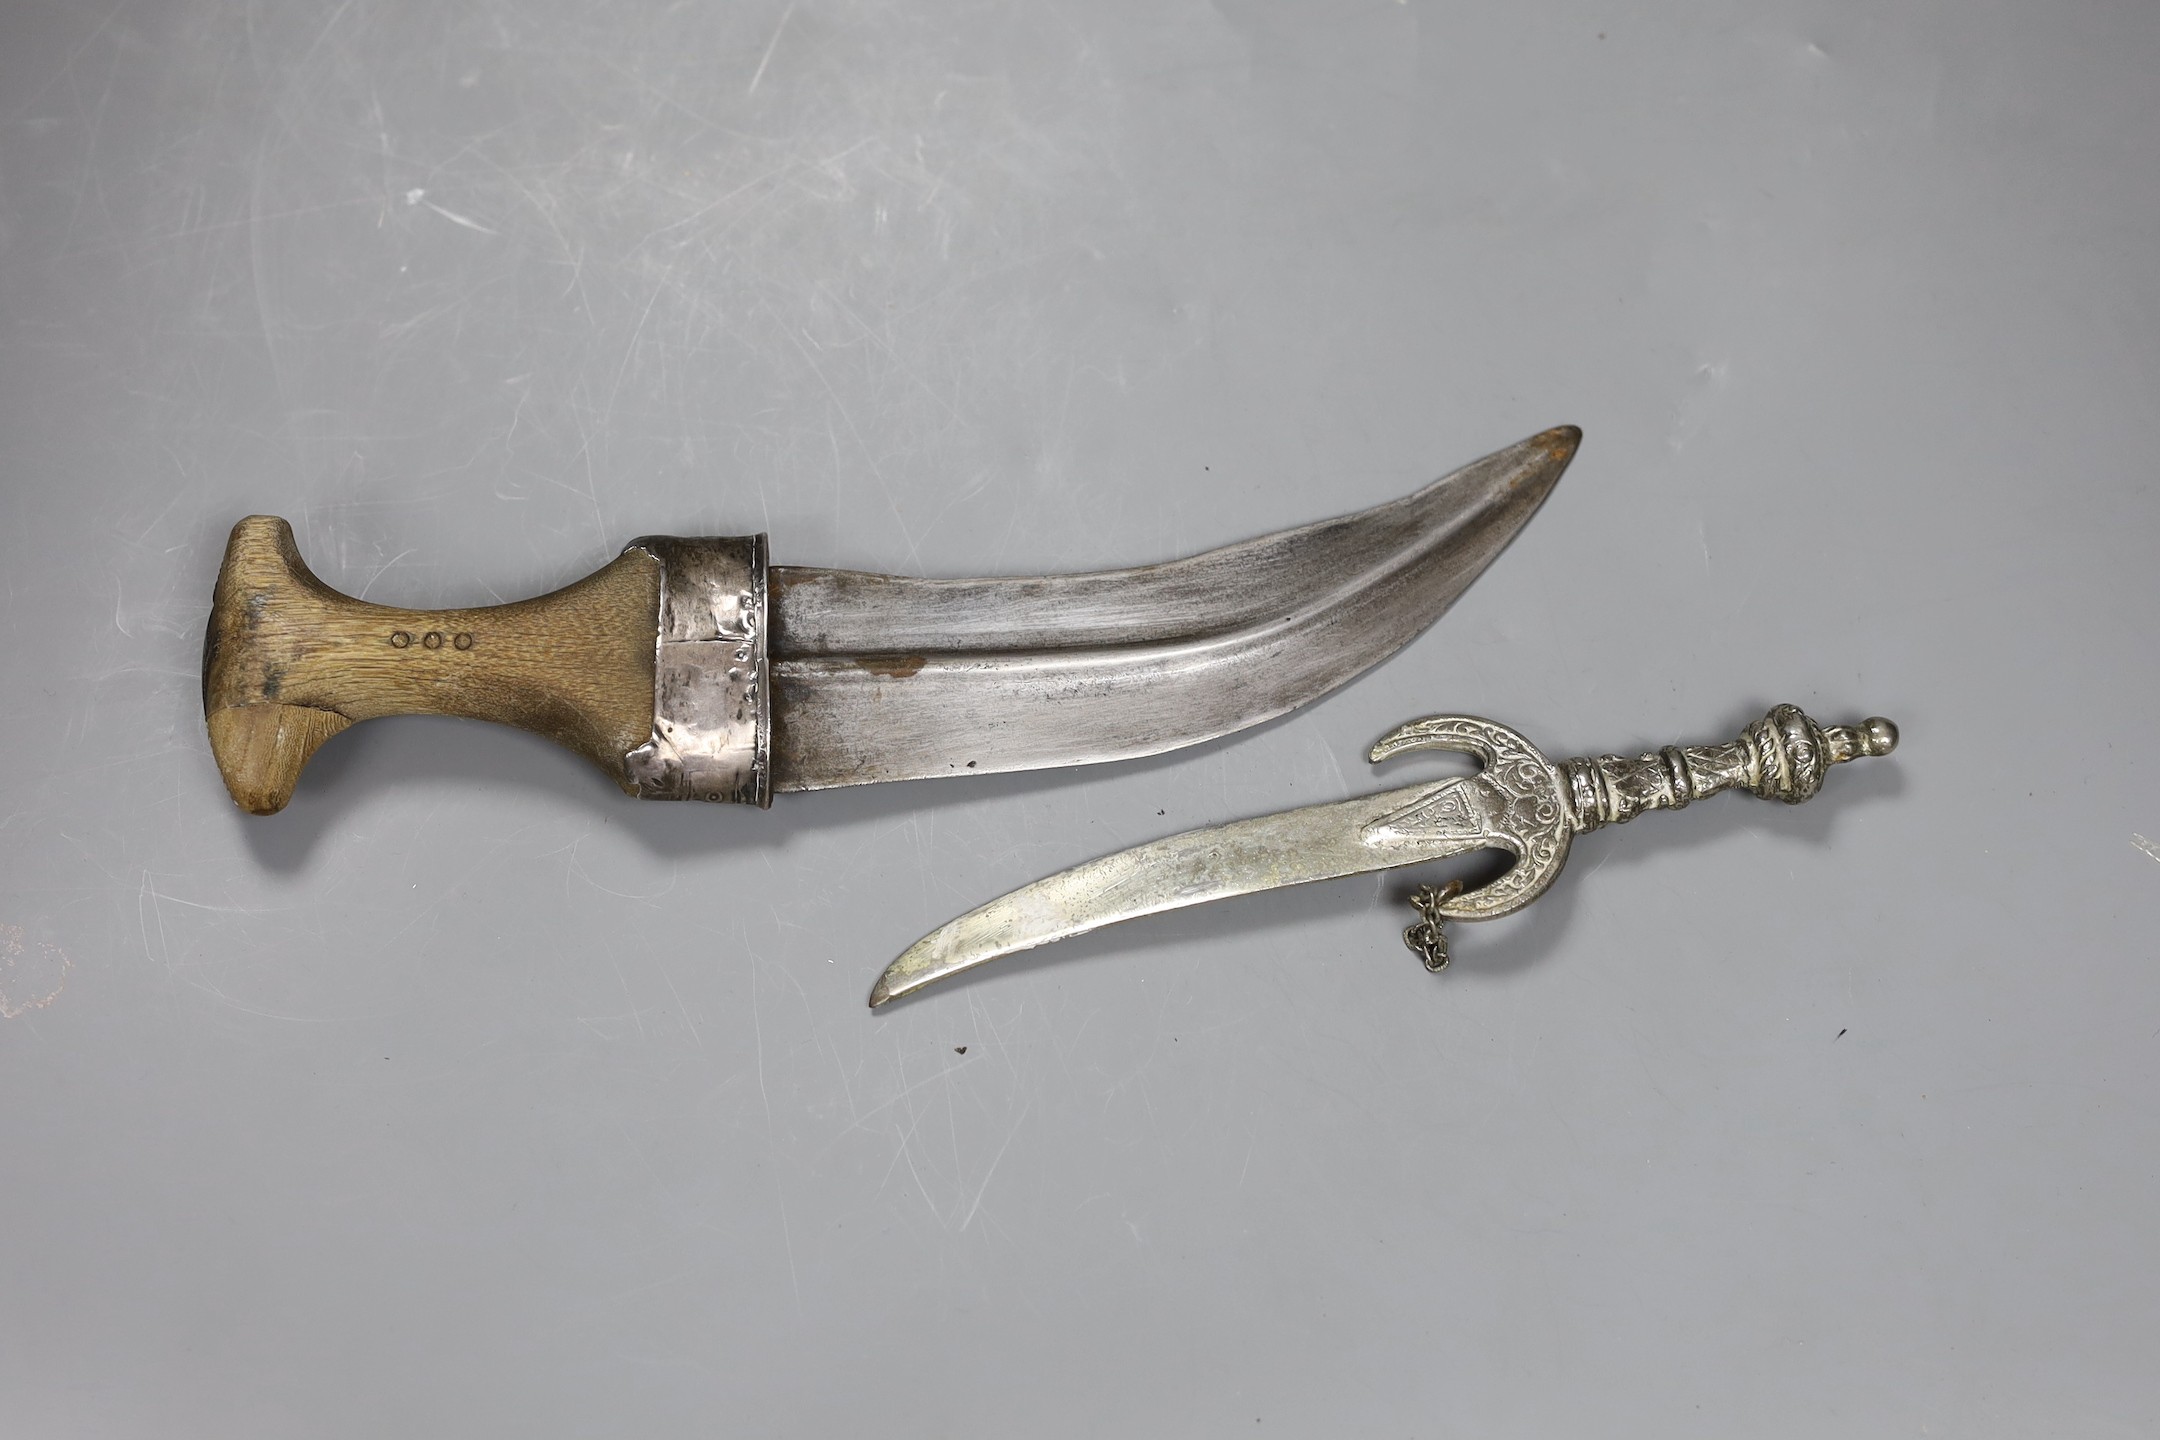 An Arab jambiya white metal dagger and one other ceremonial dagger